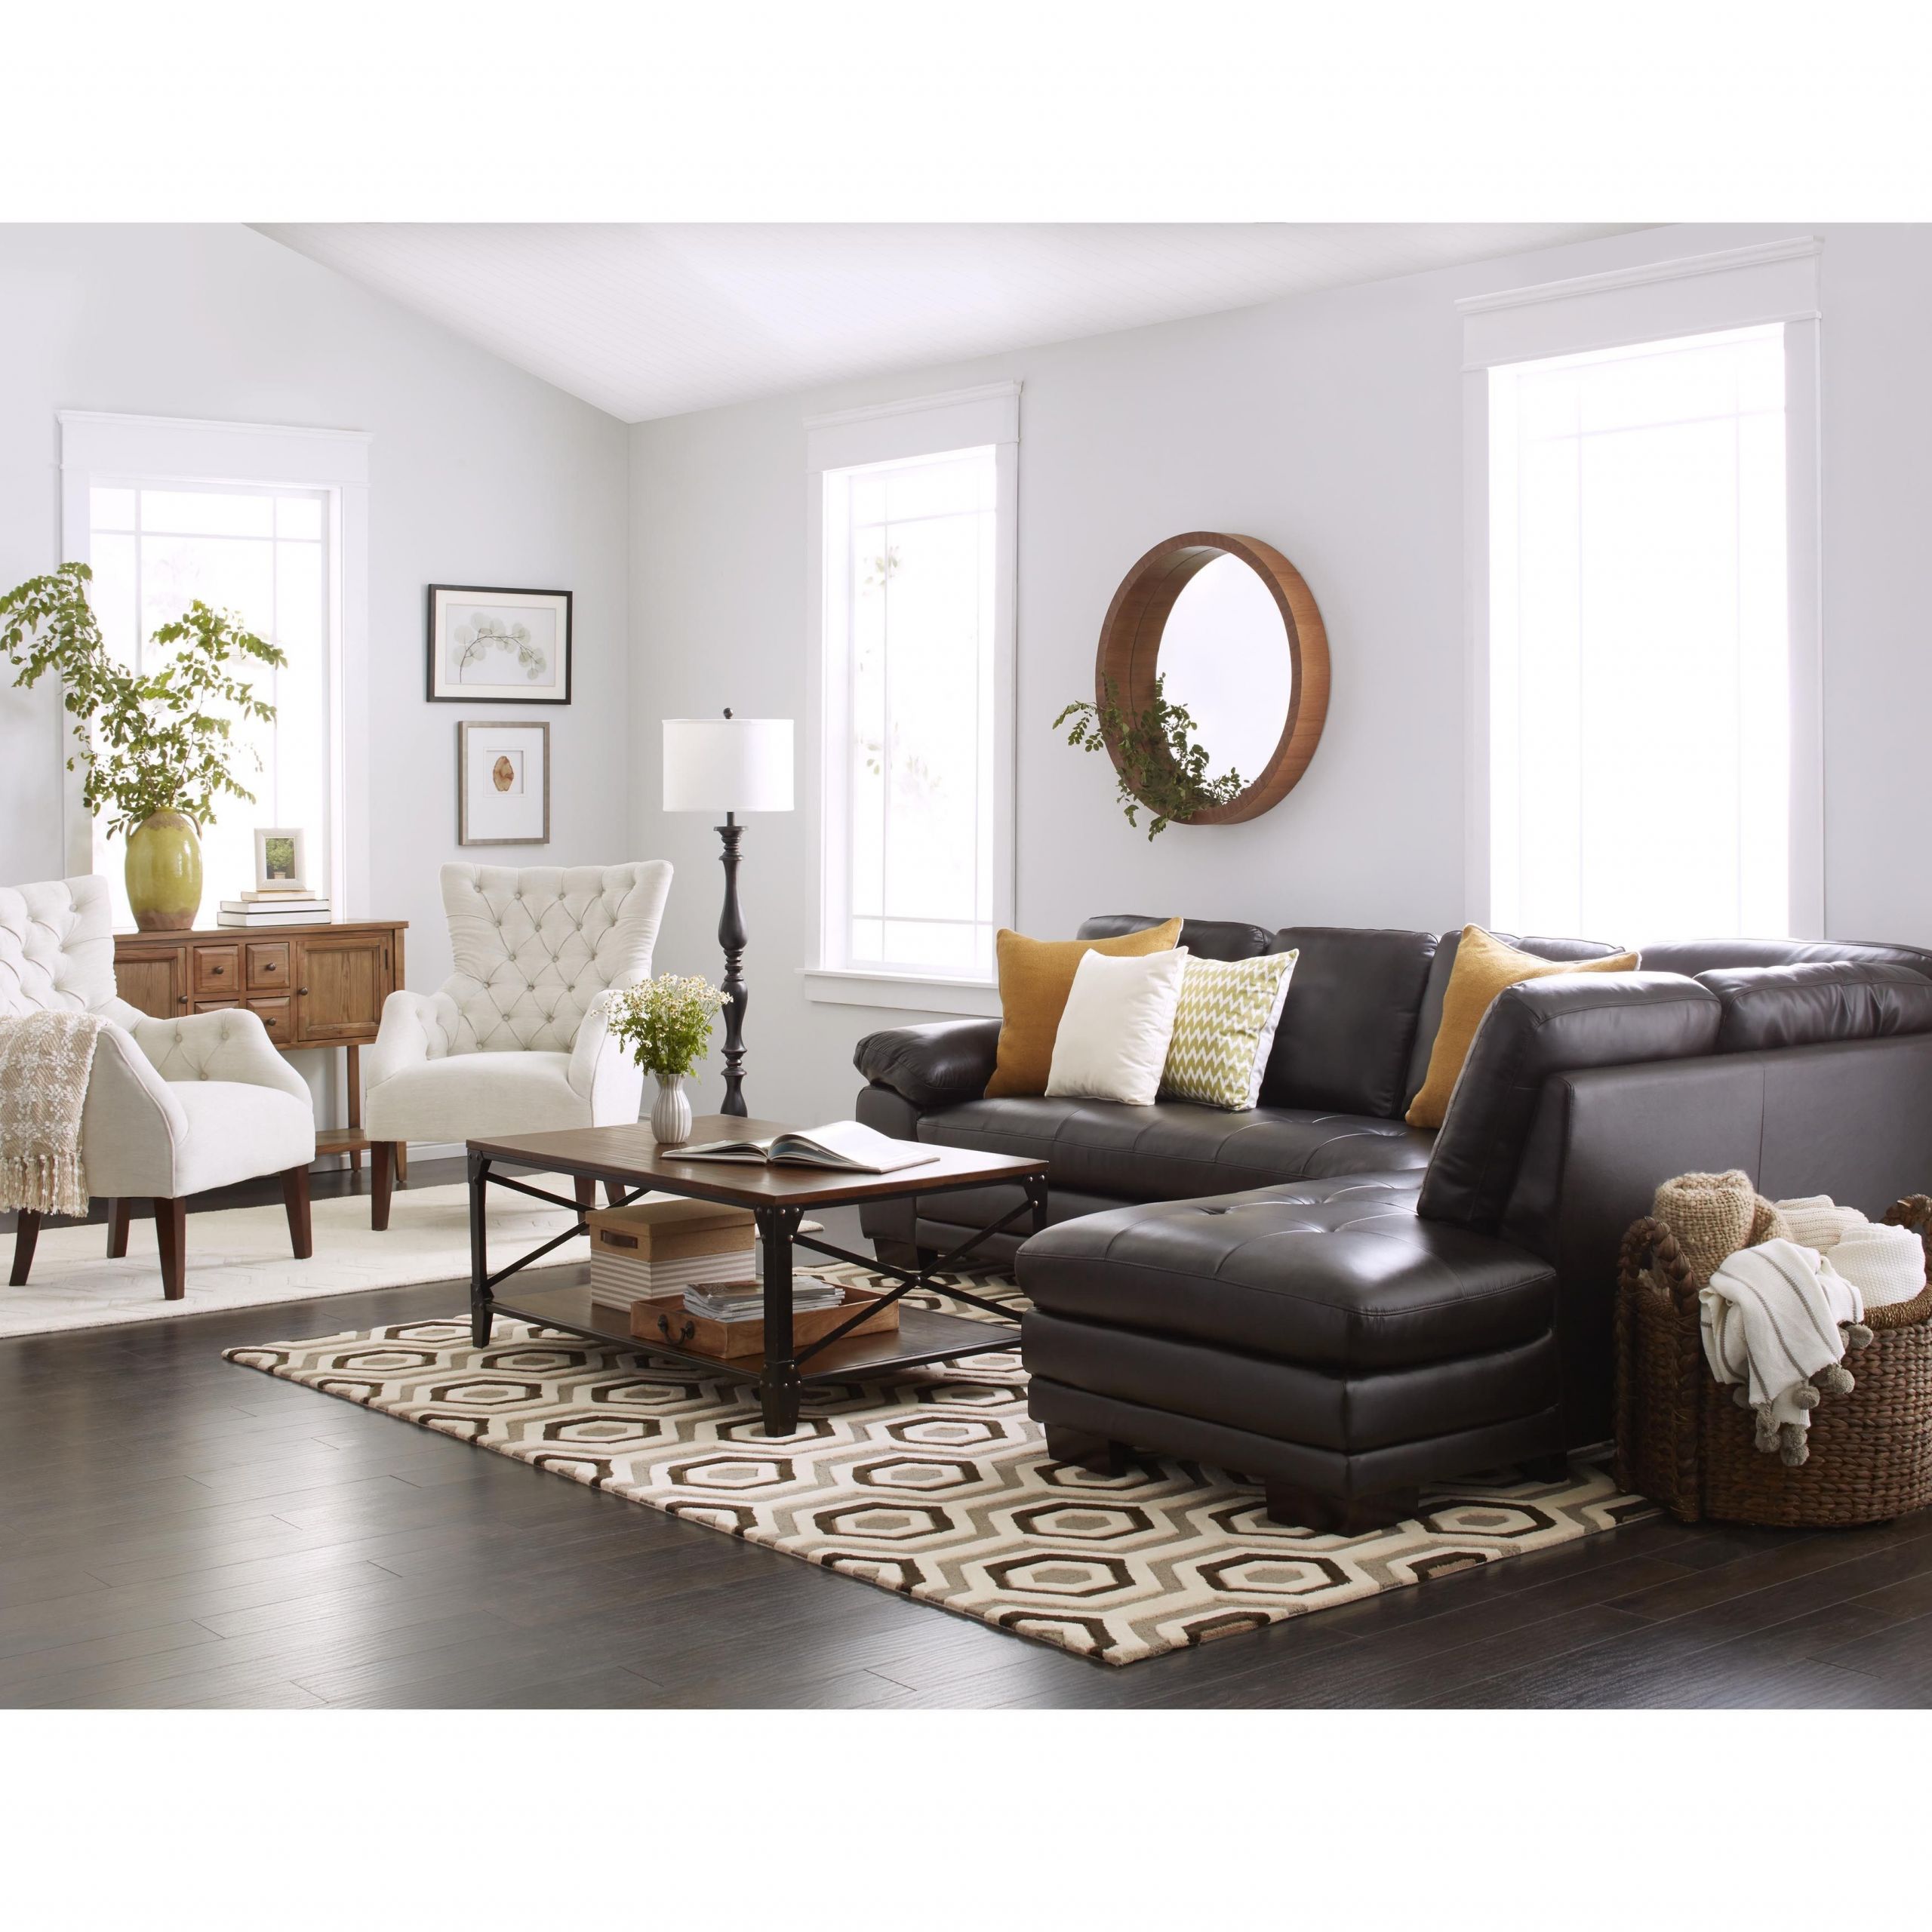 Brown Sectional Living Room Ideas
 line Shopping Bedding Furniture Electronics Jewelry